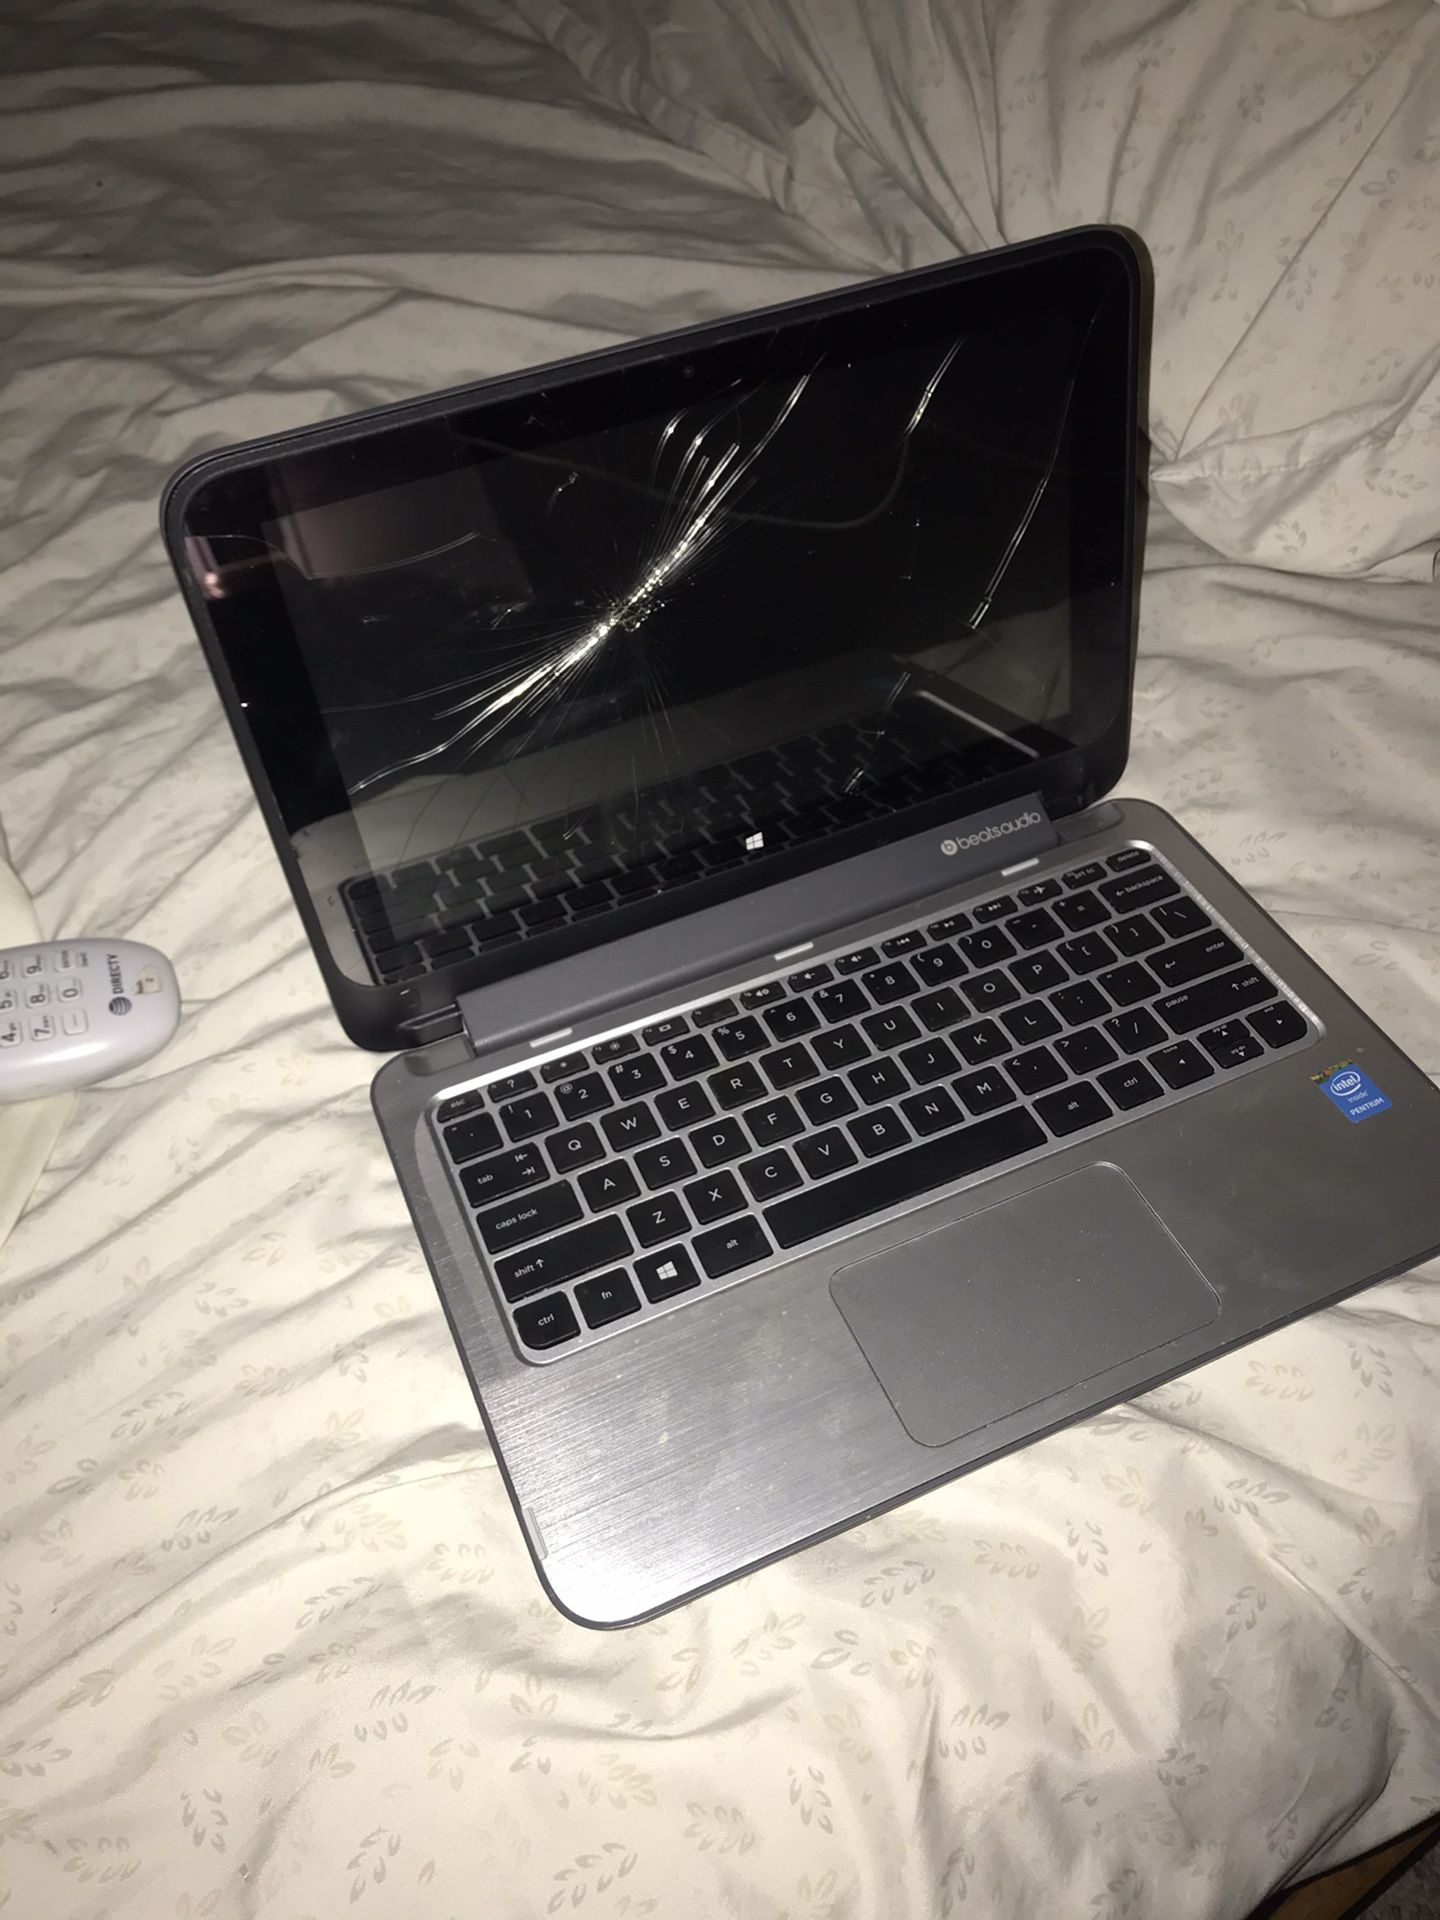 HP Pavilion 11-n010dx Tablet/Laptop w/ Cracked Screen That Needs Replacing